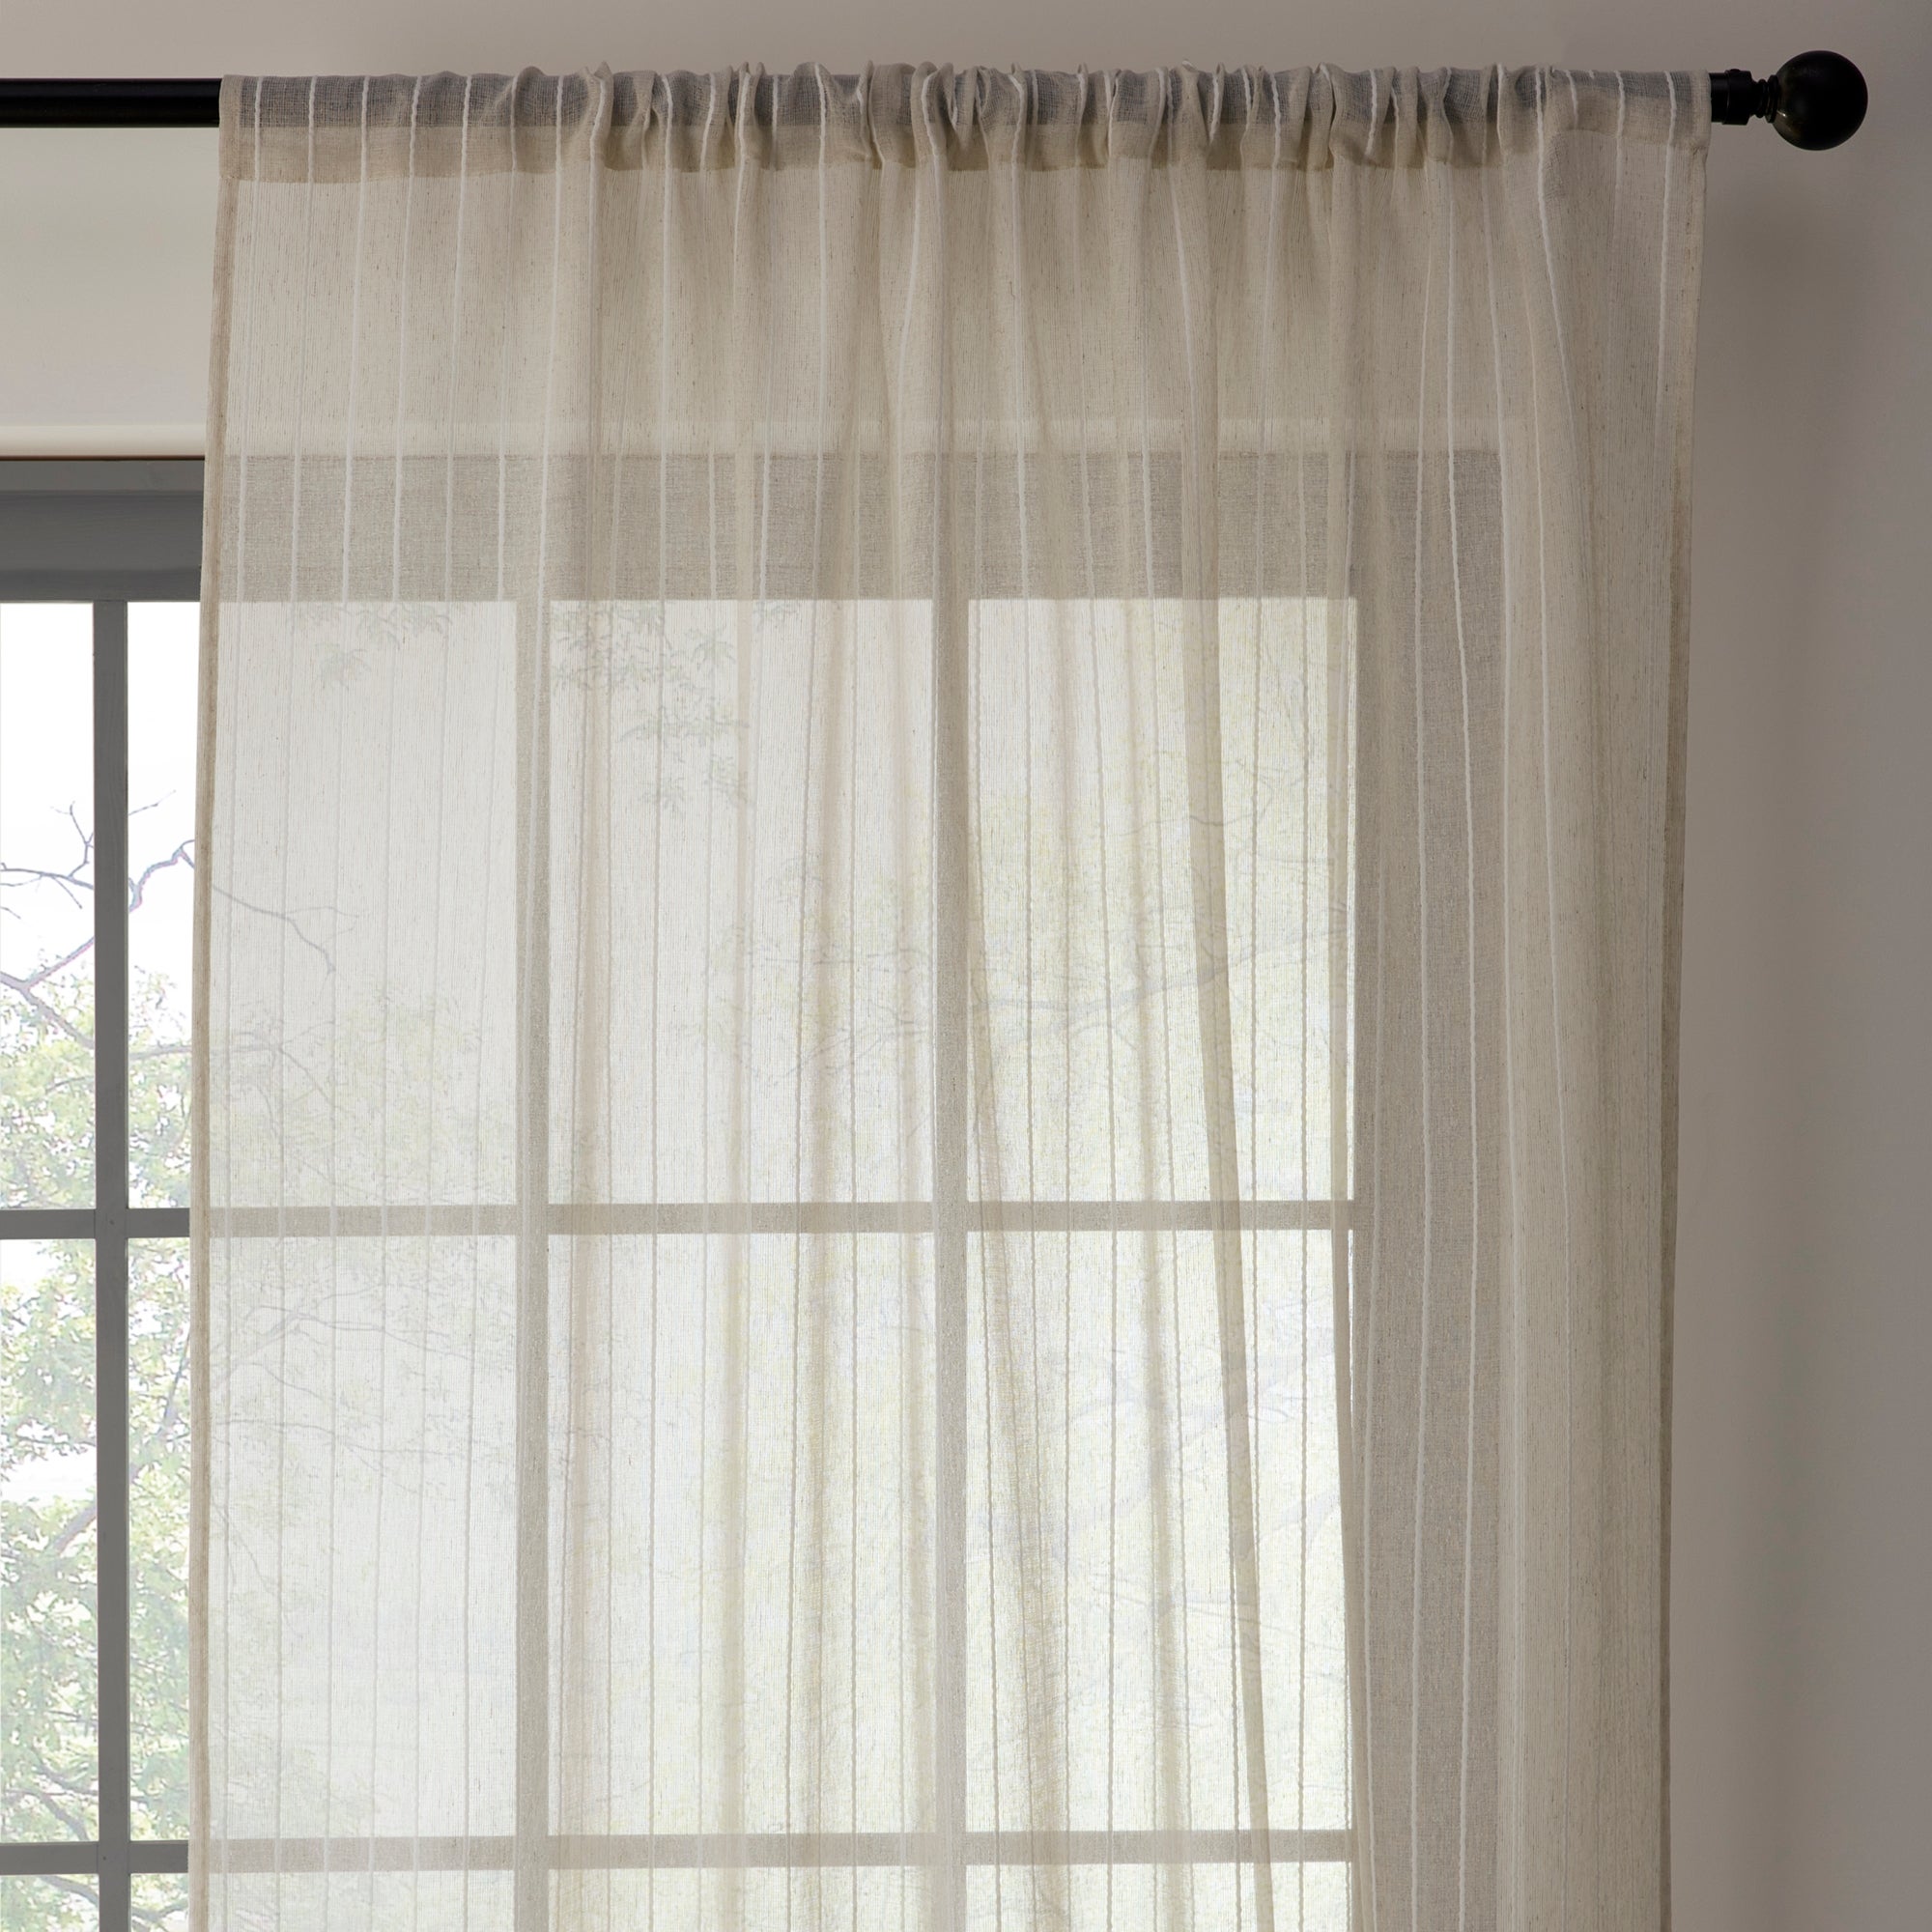 Voile & Net Curtains - Browse Our Full Range